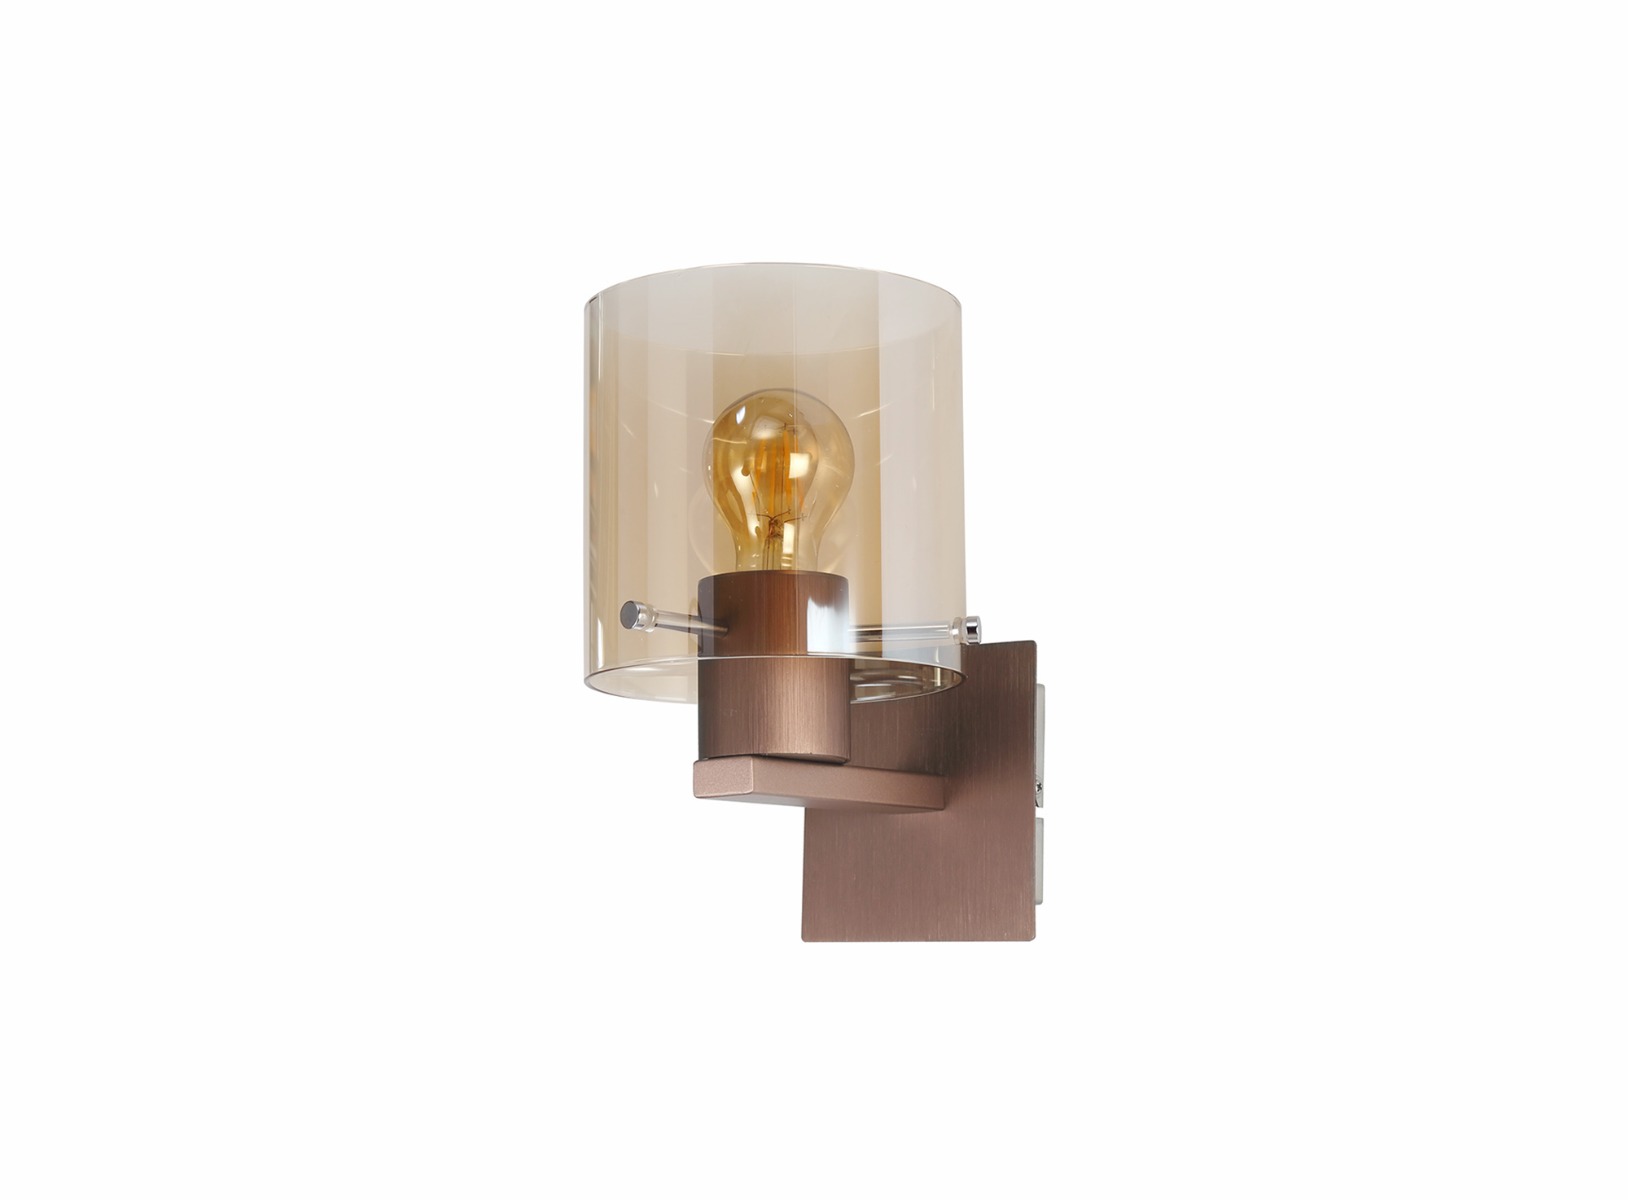 Image of Nordic 1 Light Ceiling Pendant Light in Mocha Finish With Amber Glass